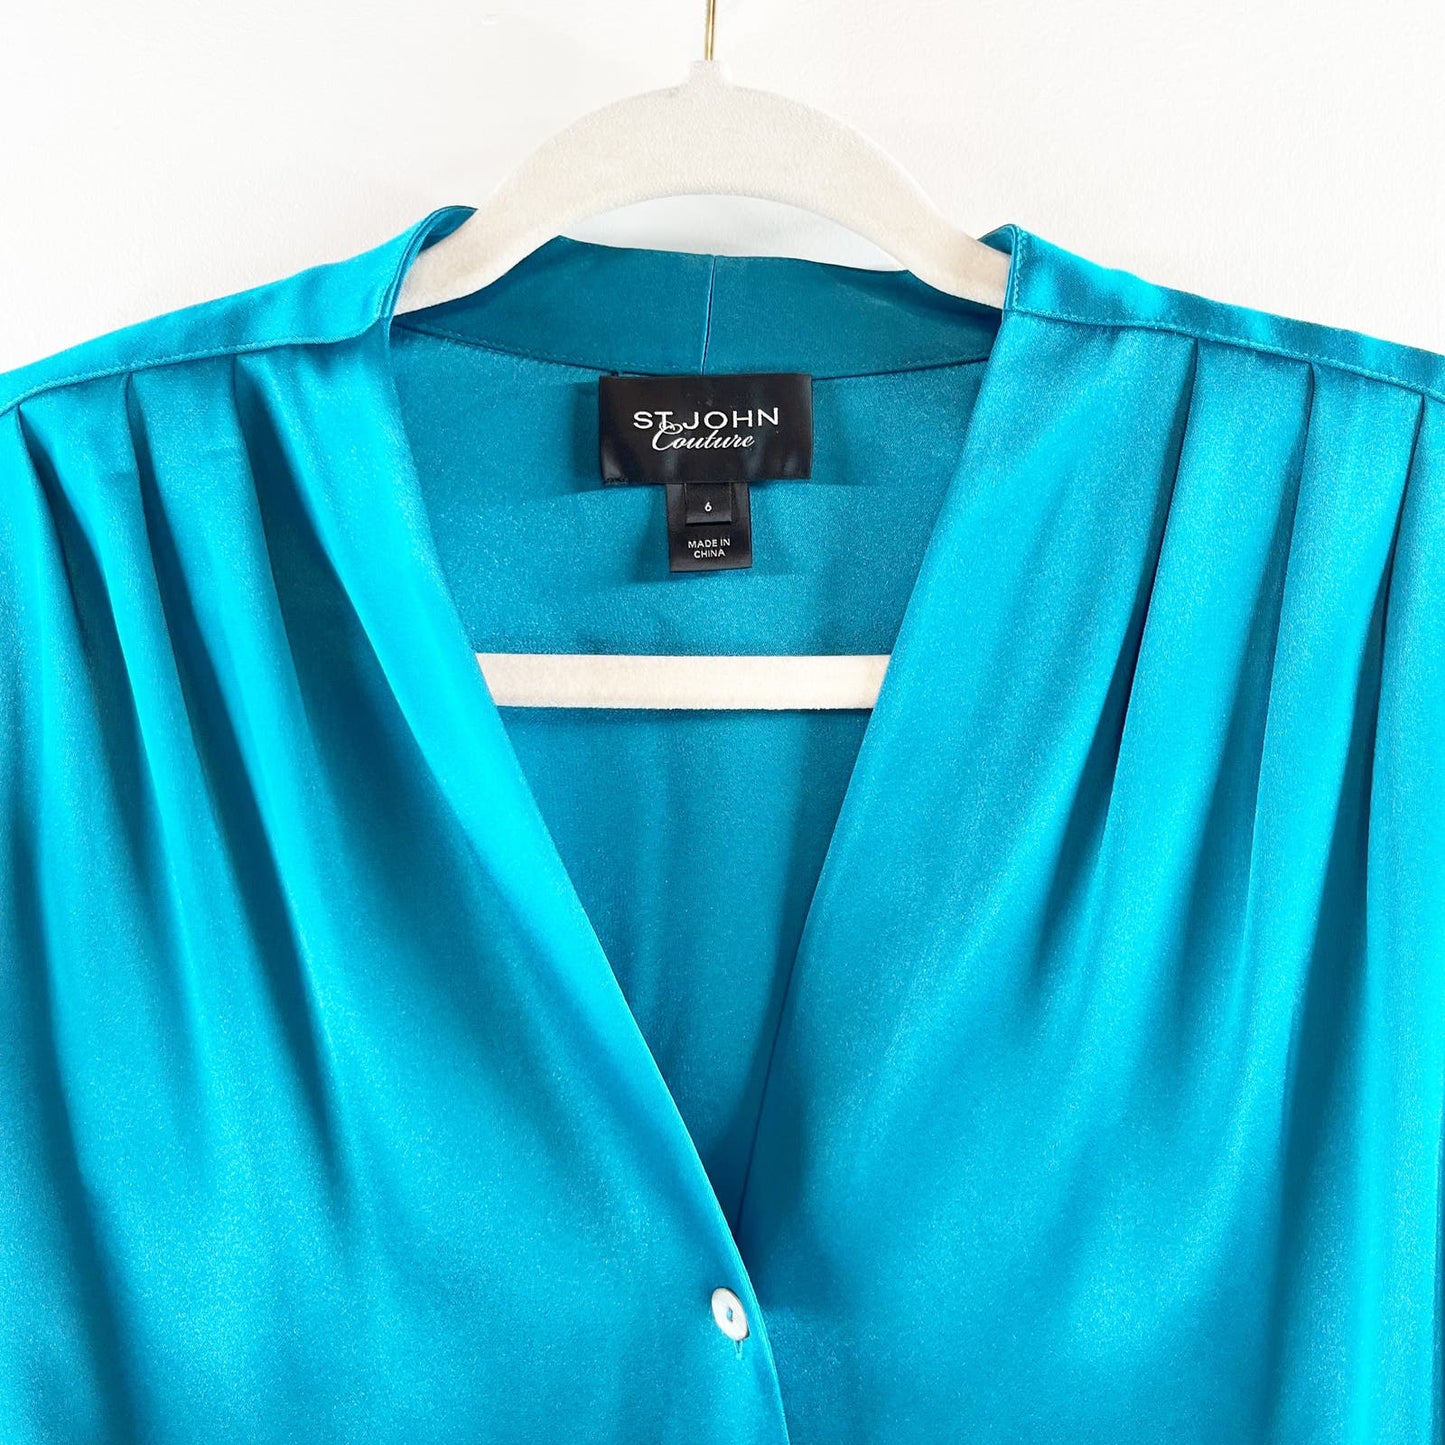 St. John Couture Button Down Long Sleeve Silky Blouse Shirt Teal Blue 6